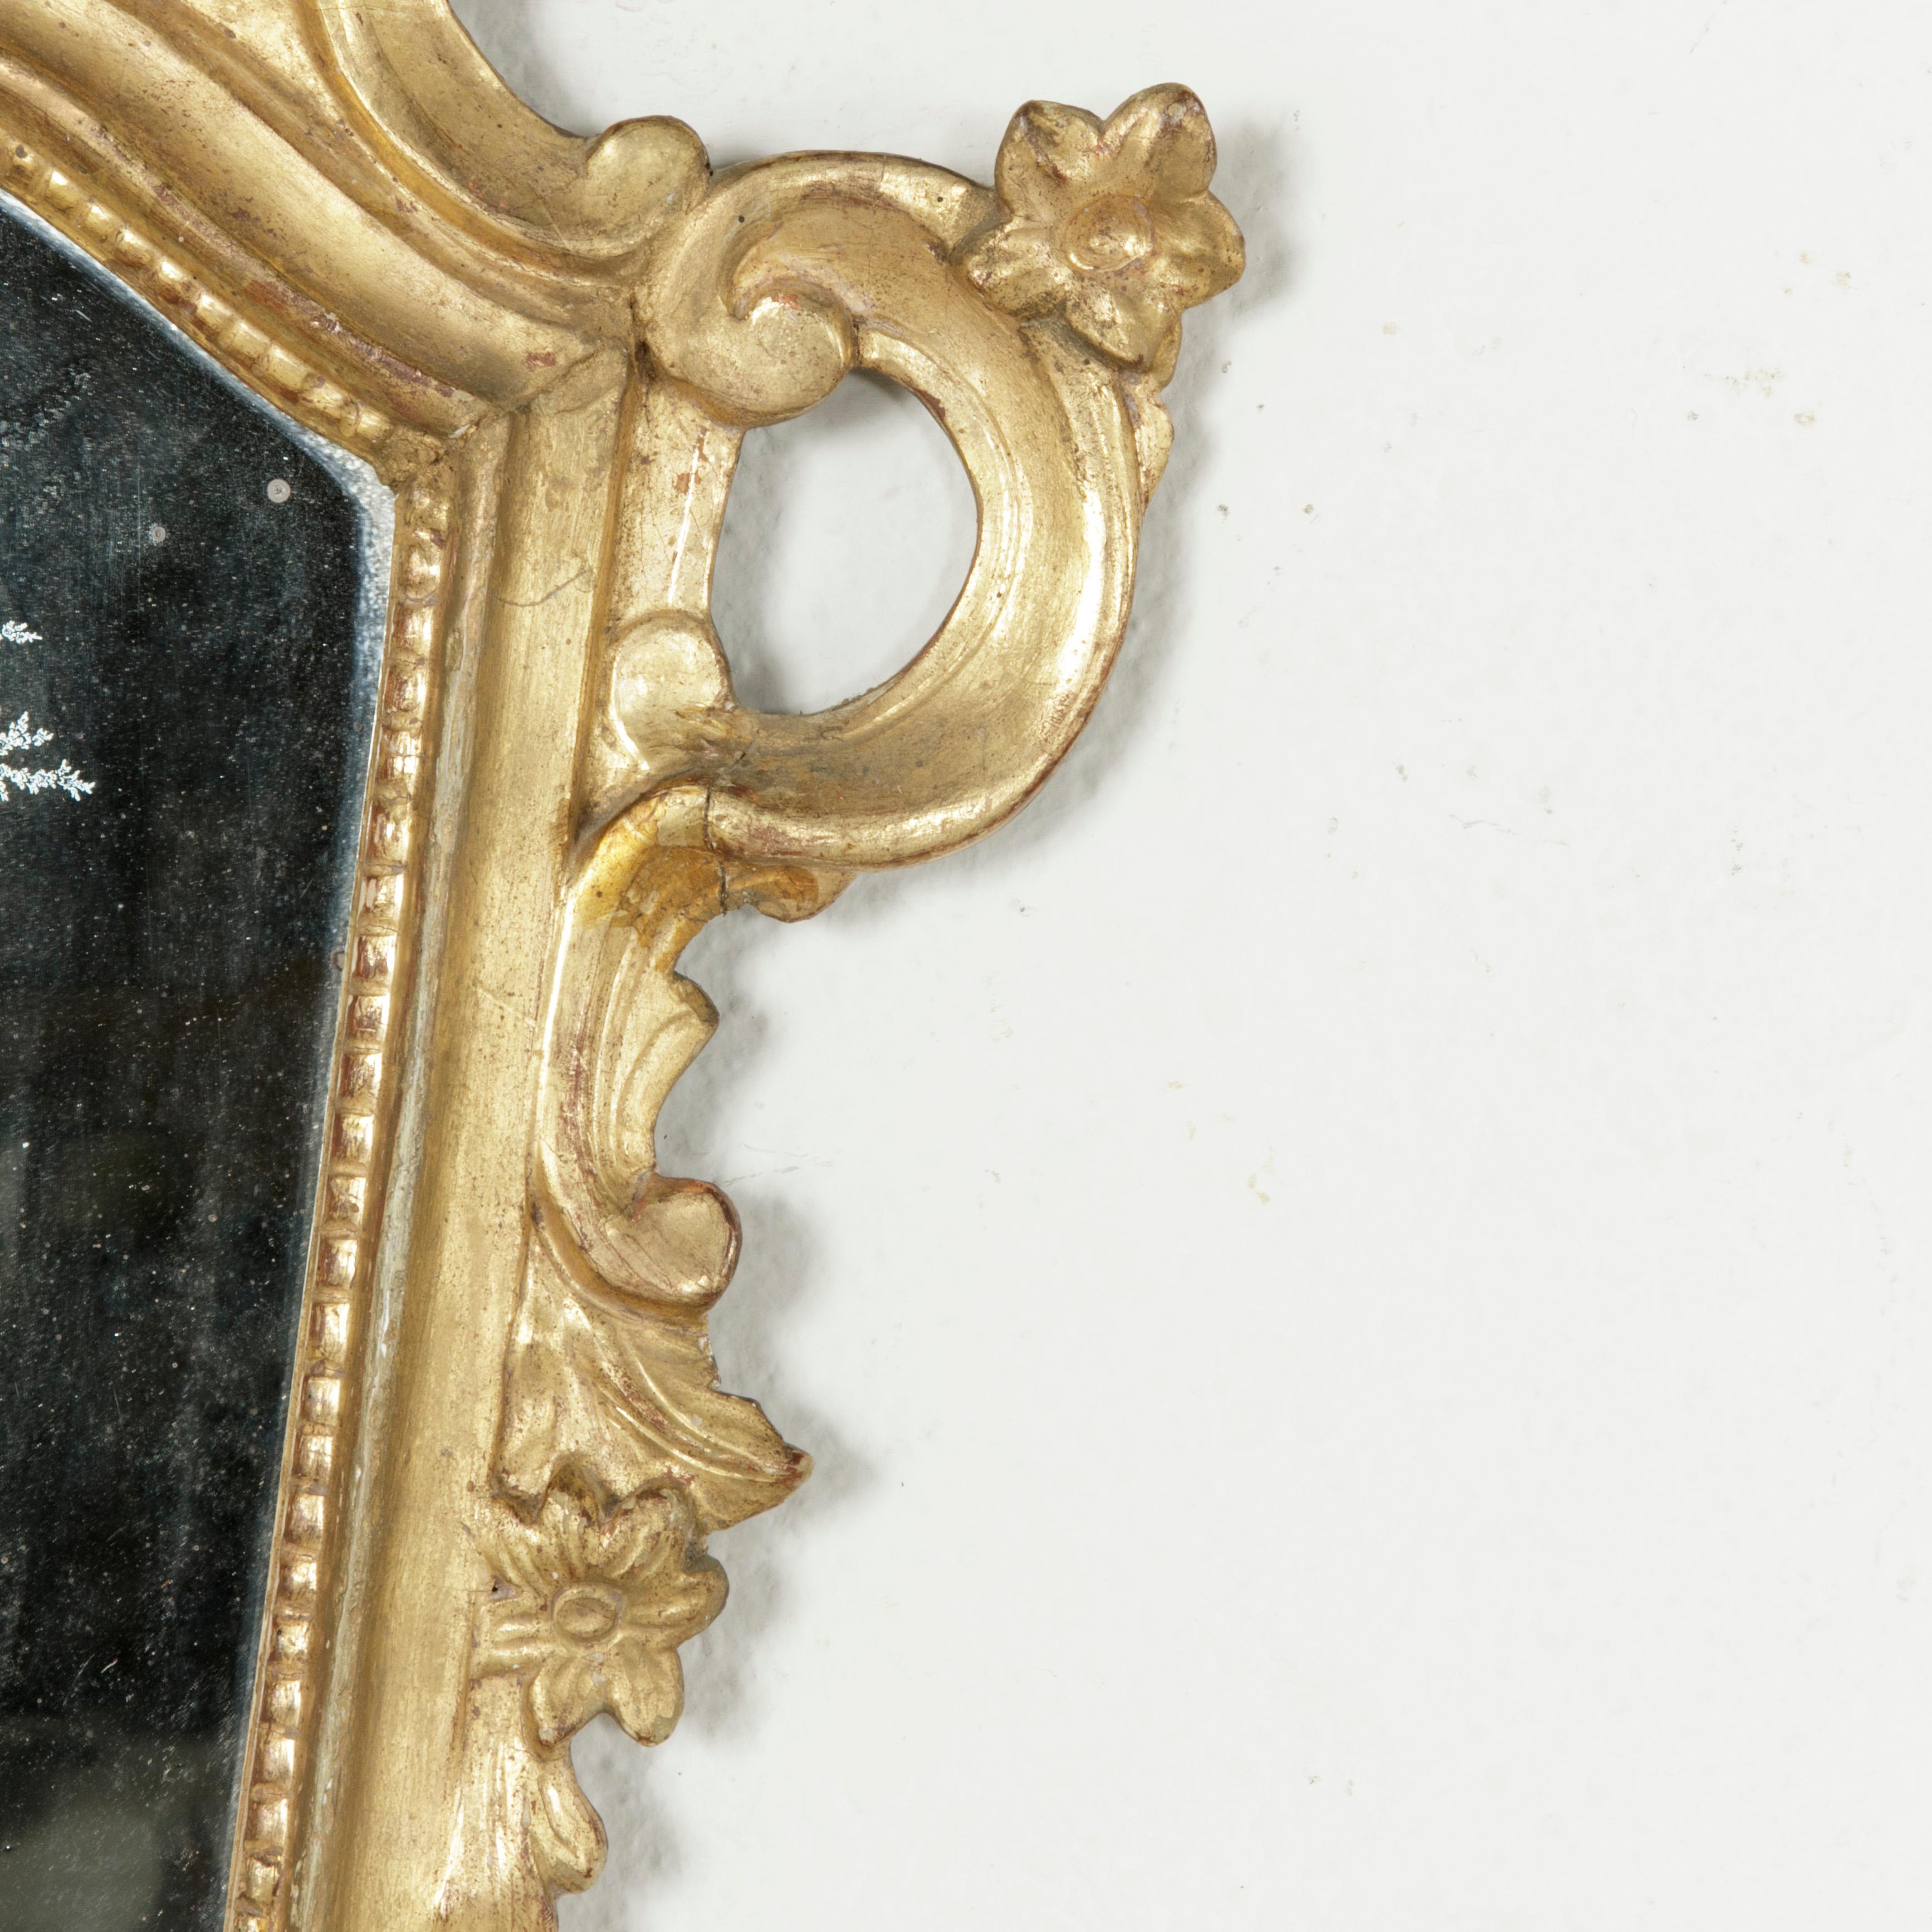 Early 18th Century French Regency Period Giltwood Mirror with Mercury Glass 3